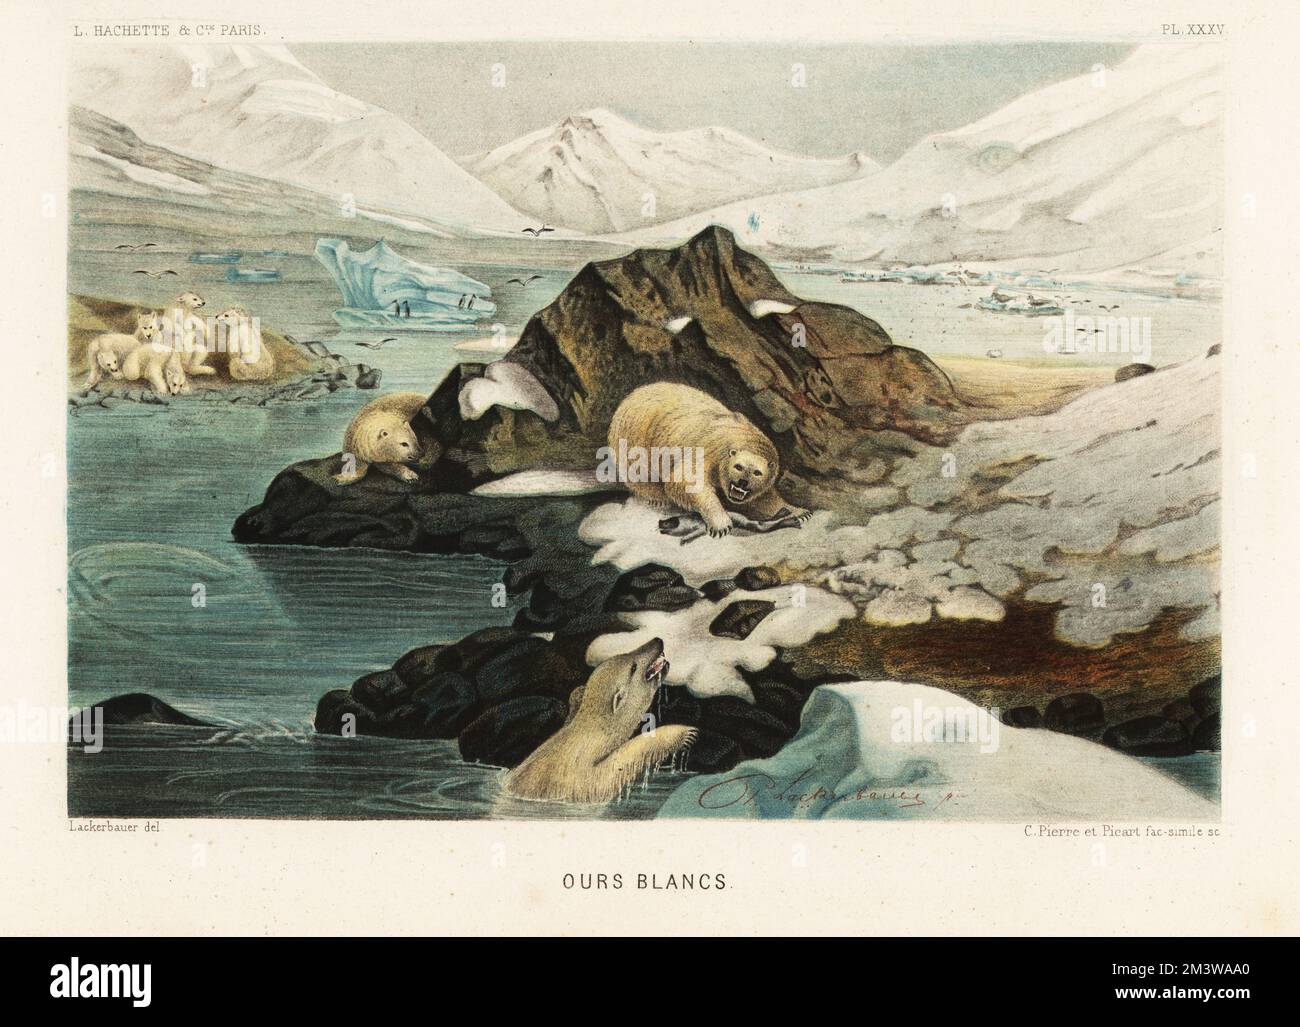 Polar bears, Ursus maritimus, hunting seals in an Arctic landscape. Ours blancs. Chromolithograph by C. Pierre and Bernard Picart after Pierre Lackerbauer from Alfred Fredol’s Le Monde de la Mer, the World of the Sea, edited by Olivier Fredol, Librairie Hachette et. Cie., Paris, 1881. Alfred Fredol was the pseudonym of French zoologist and botanist Alfred Moquin-Tandon, 1804-1863. Stock Photo